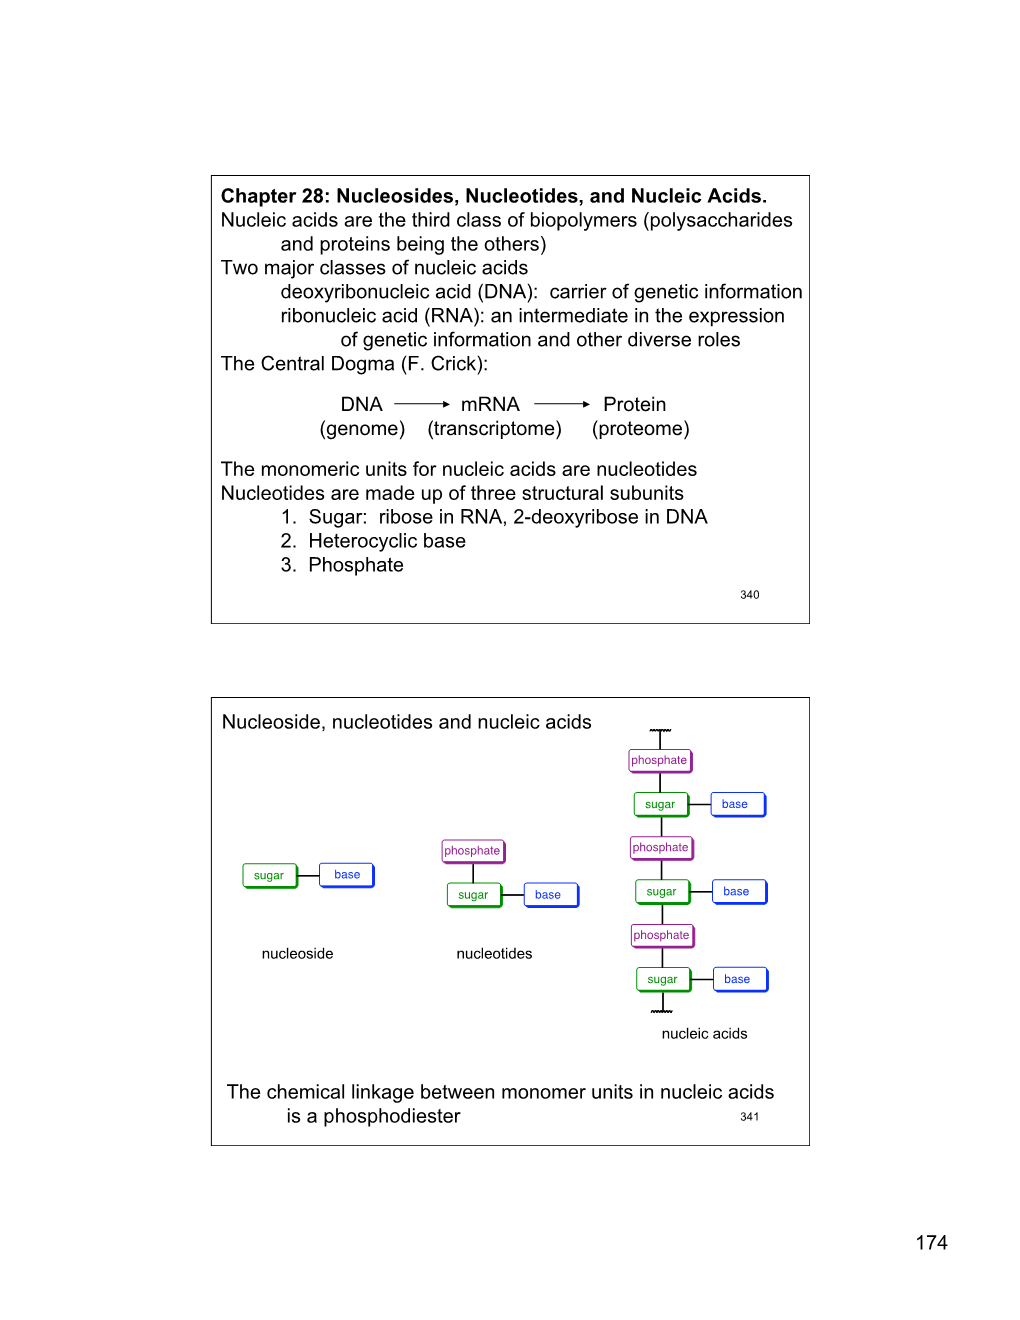 Chapter 28: Nucleosides, Nucleotides, and Nucleic Acids